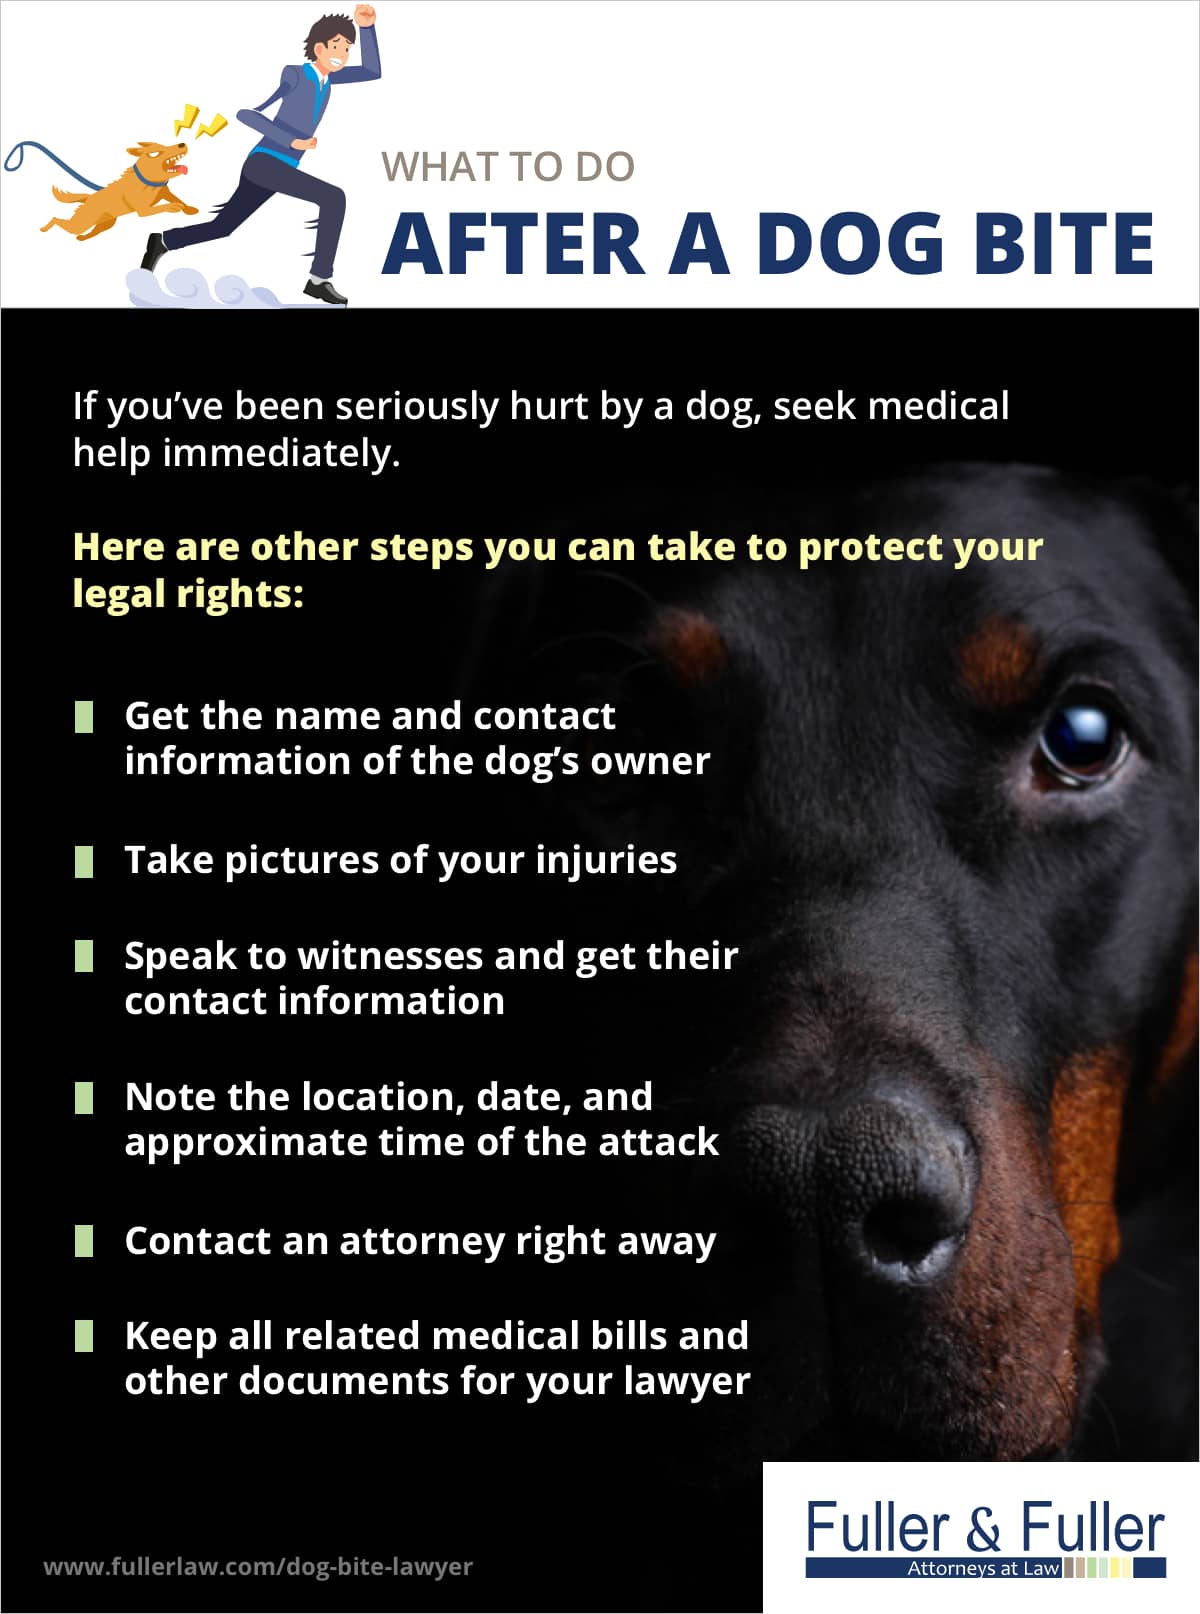 What to Do After a Dog Bite | Fuller and Fuller Attorneys at Law